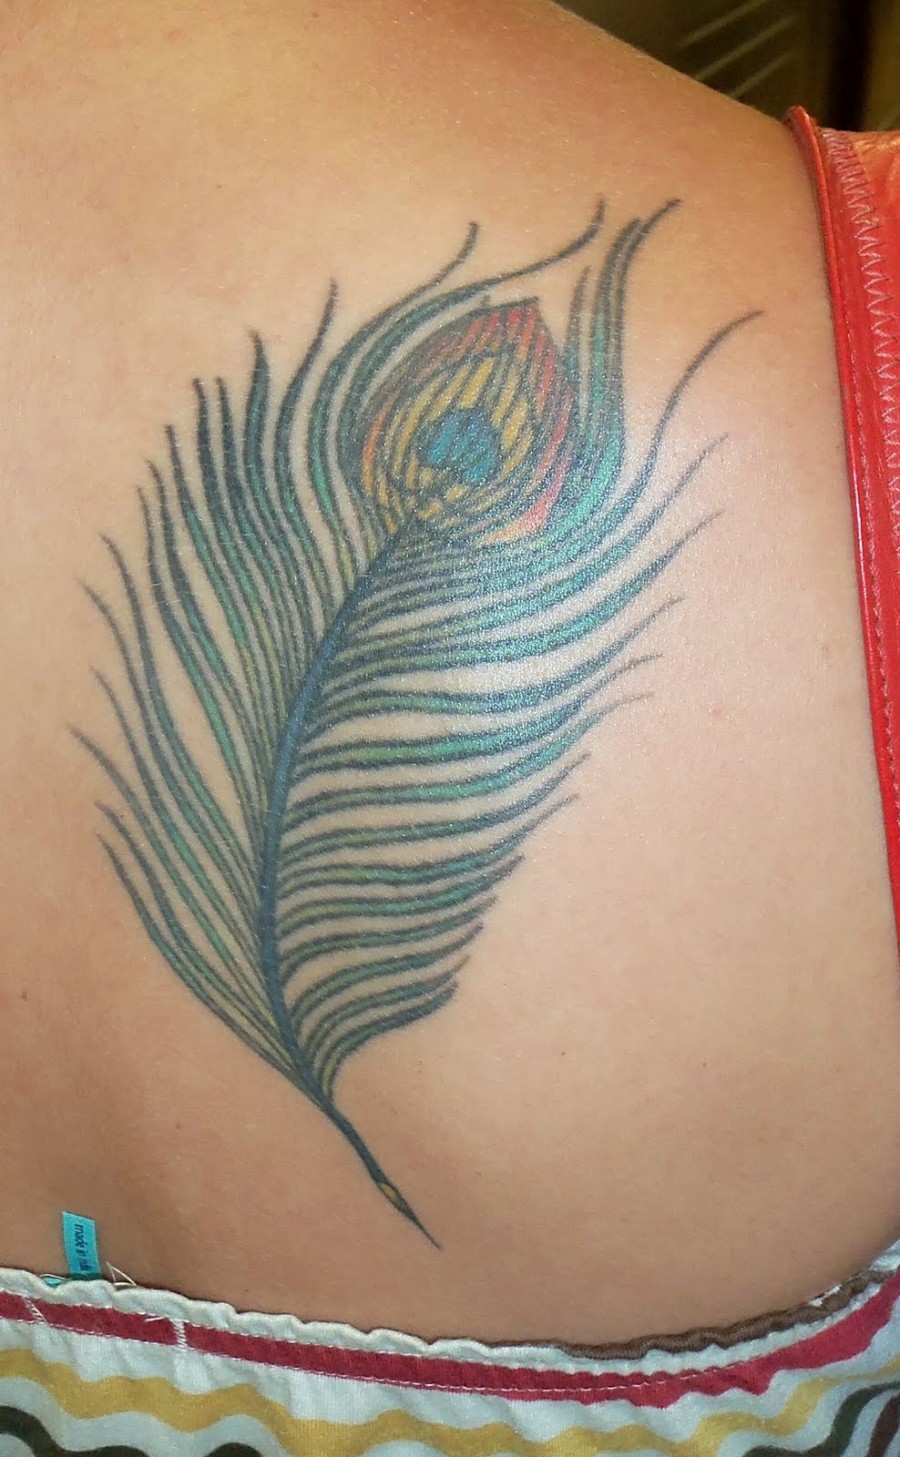 Feather Peacock Tattoo Design for Women